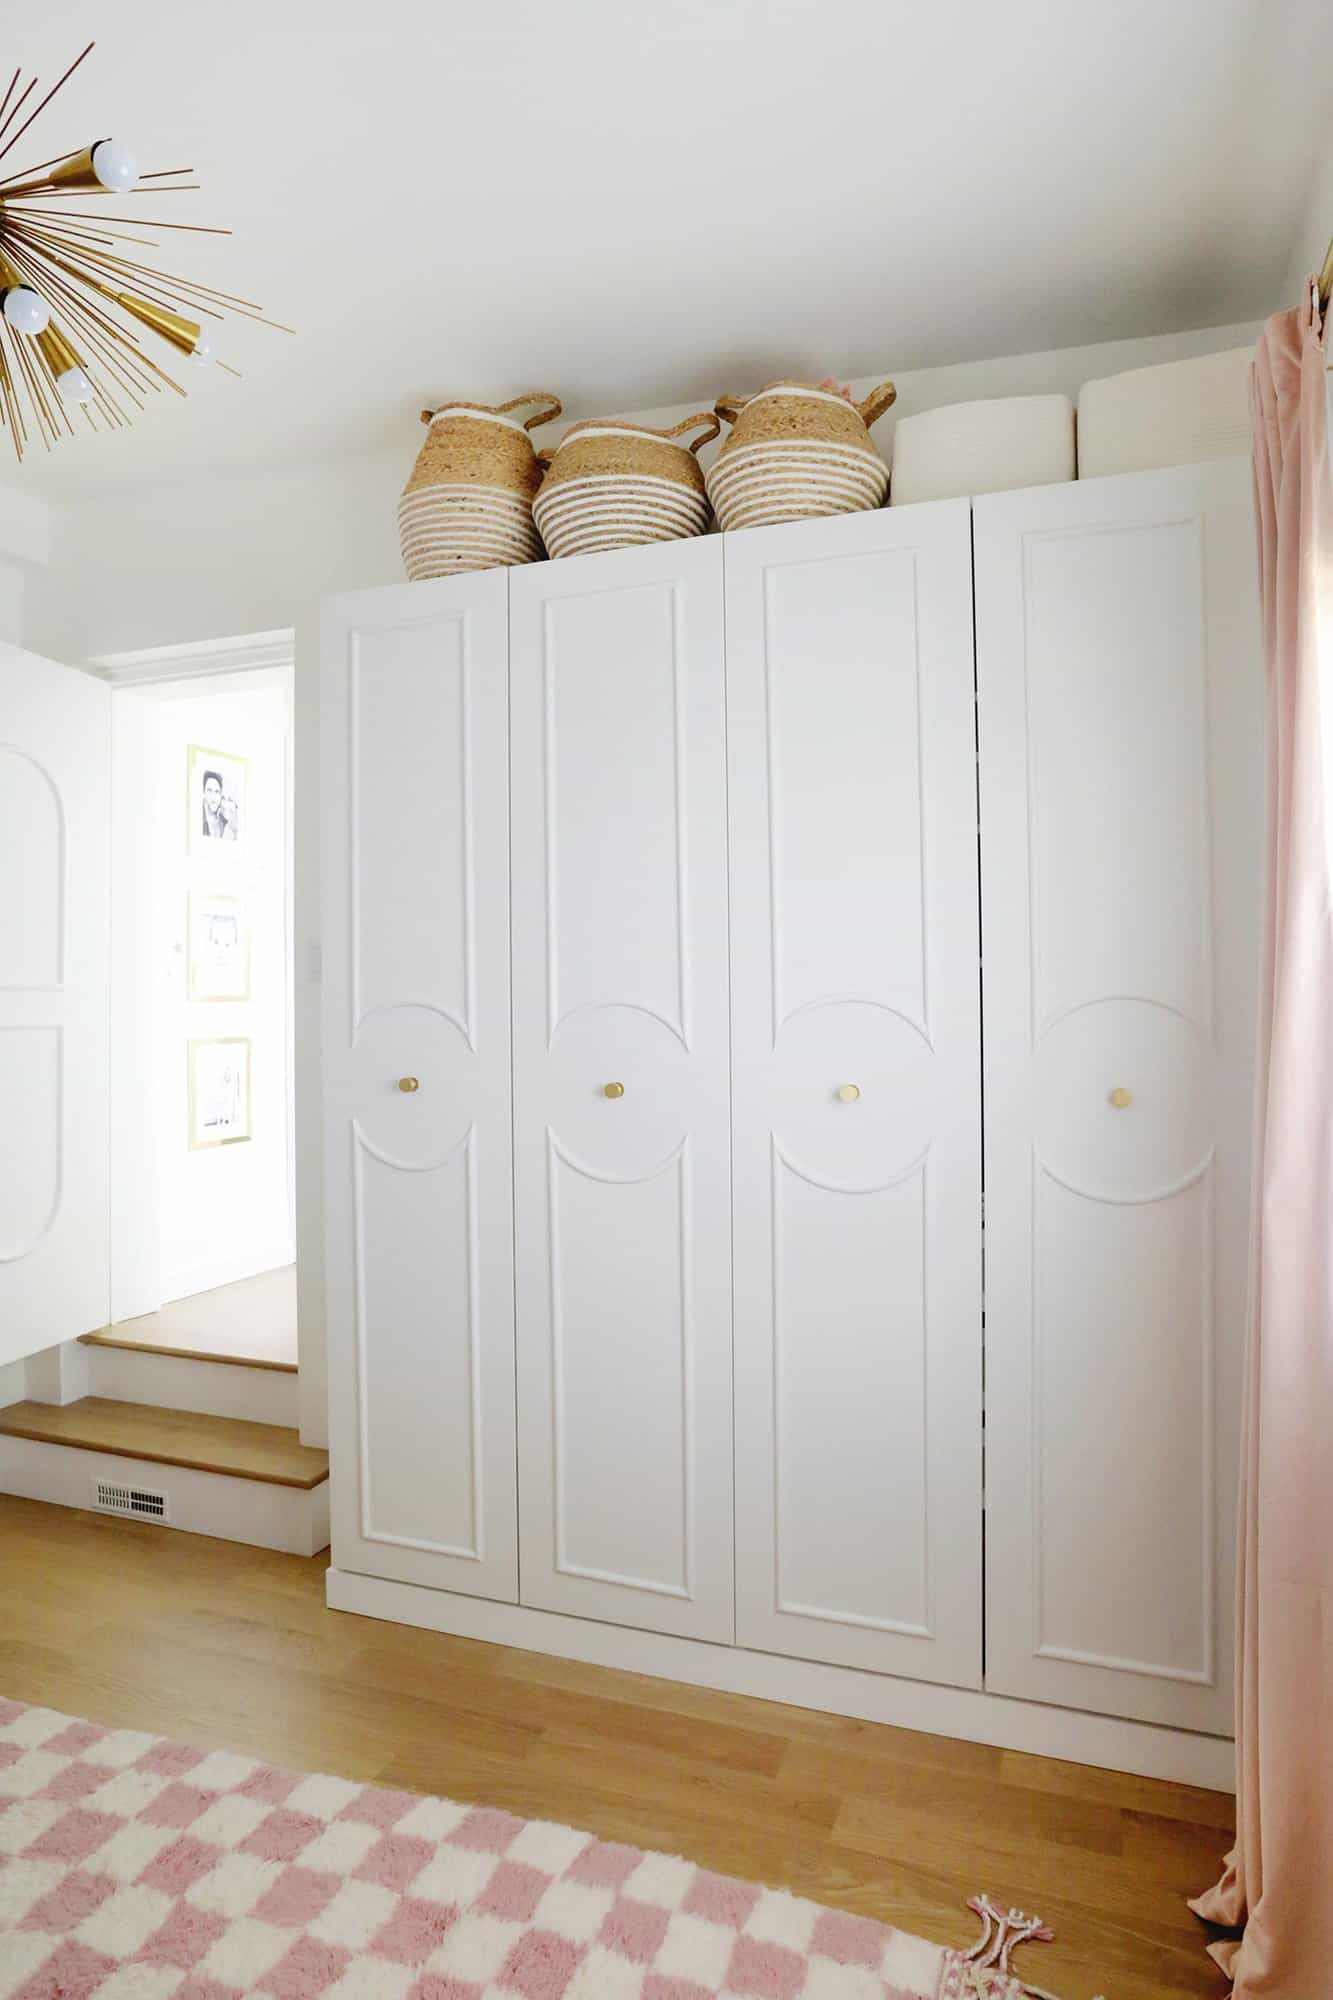 IKEA Pax wardrobes with arched trim added